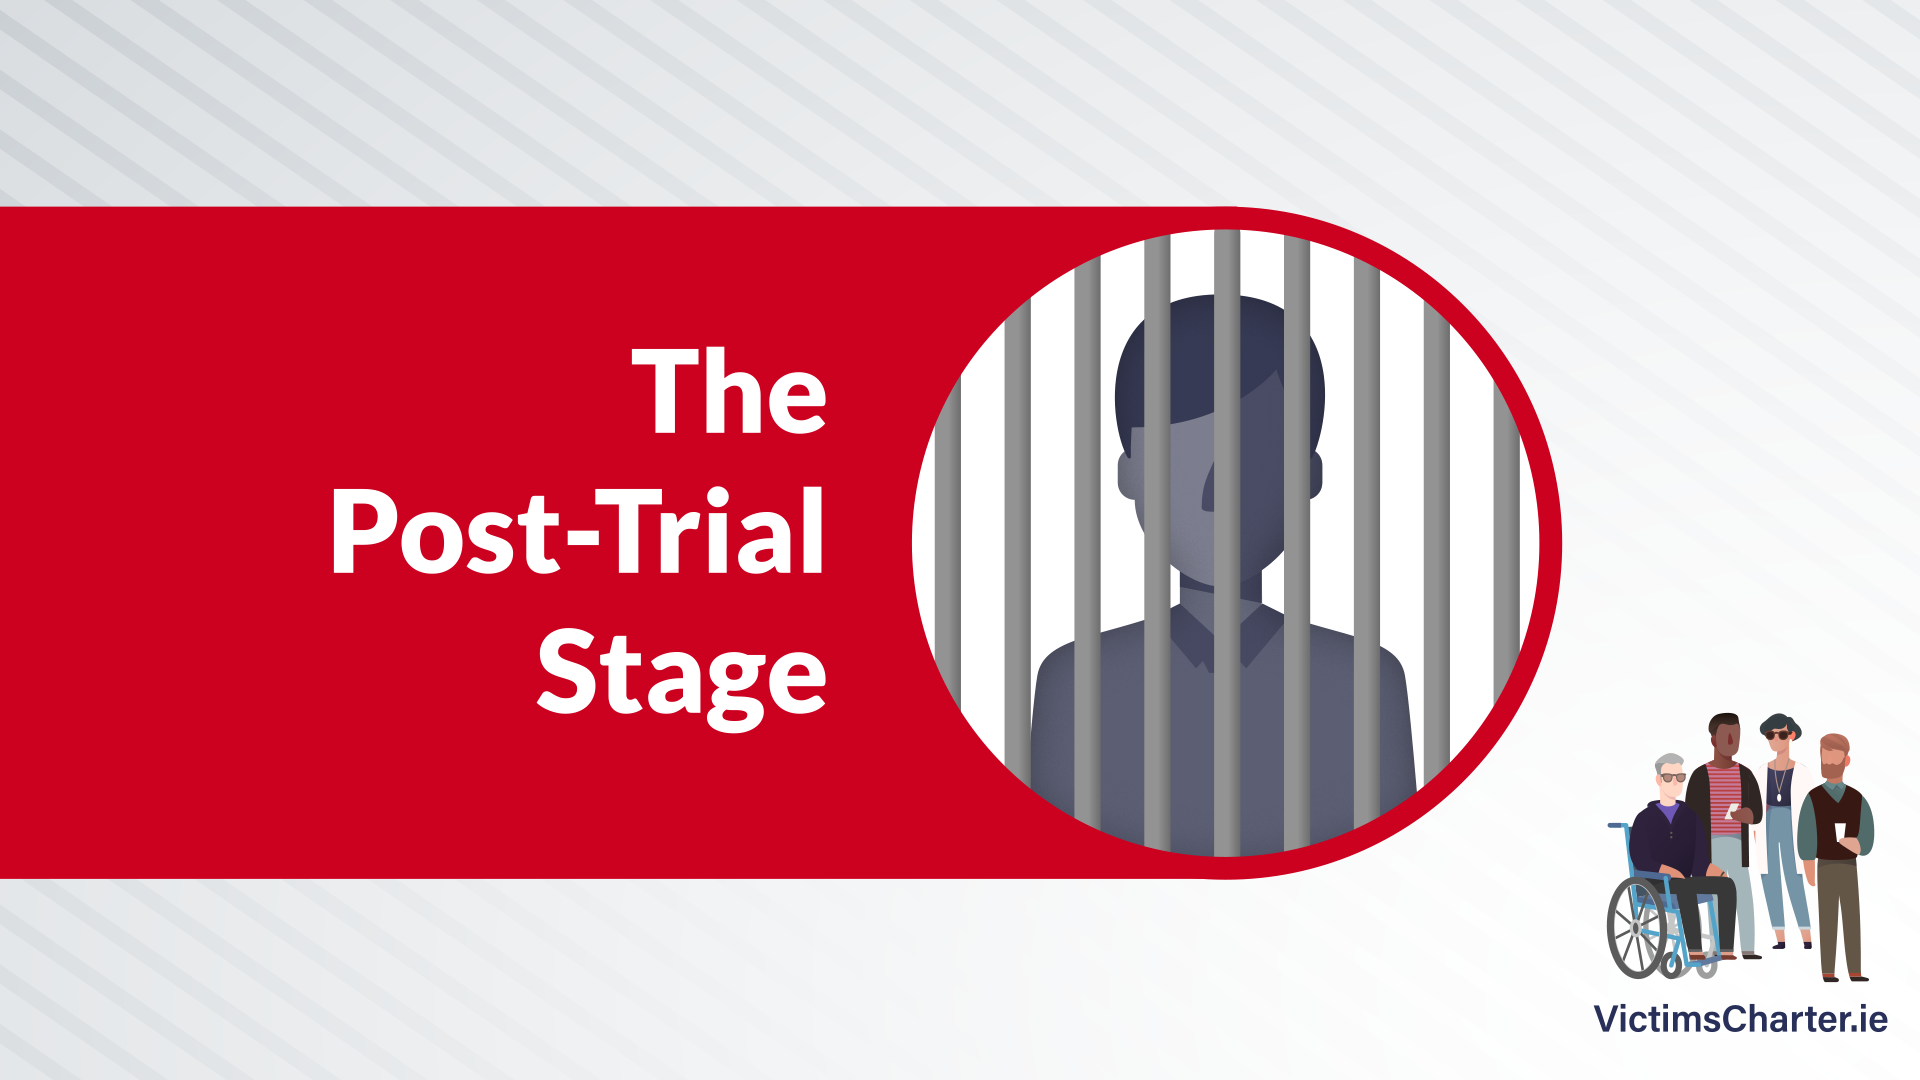 To access video hosted on youtube about Victims Charter - The Post Trial Stage please click here